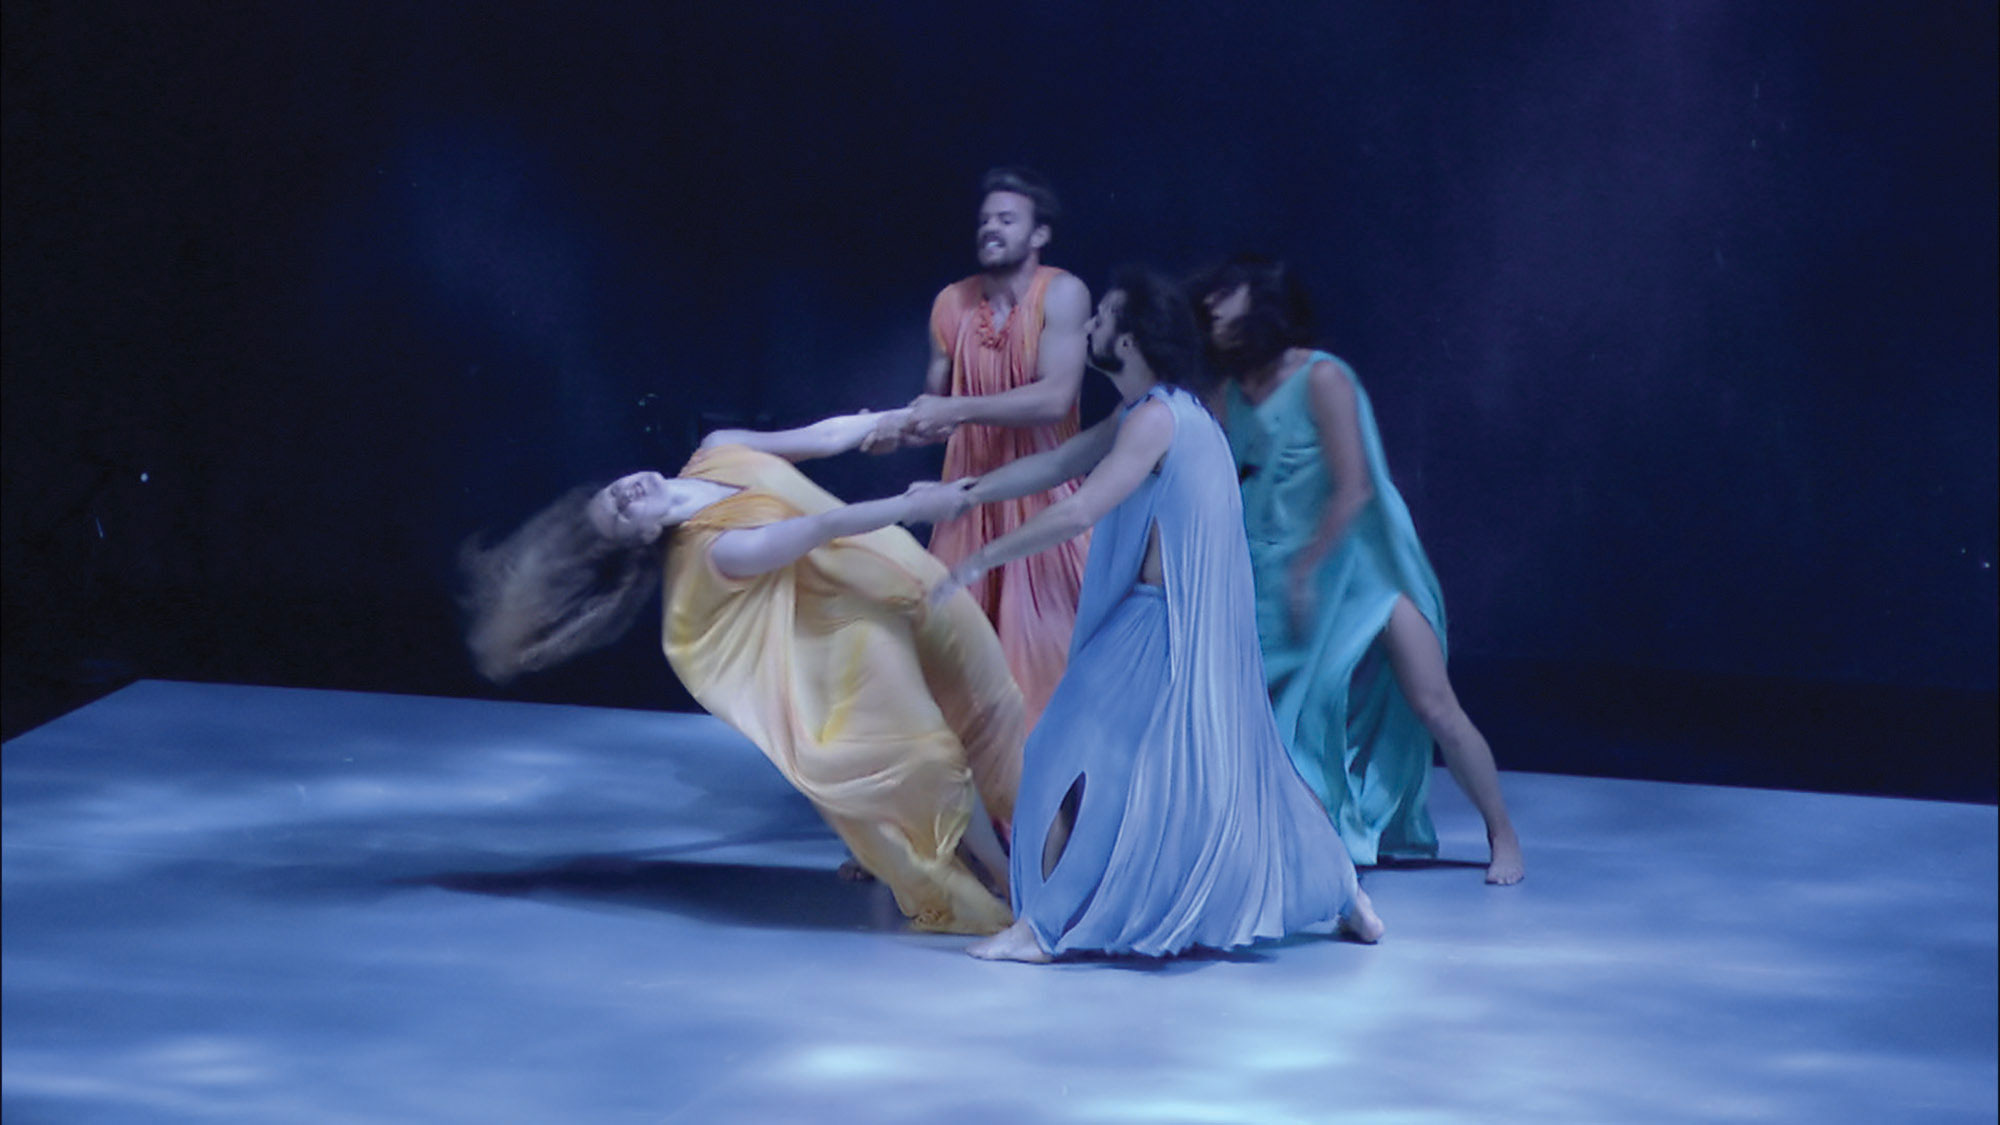 Four dancers wearing pastel colored flowing costumes standing in a circle. A woman in yellow throws herself back dramatically as the others hold her arms. 